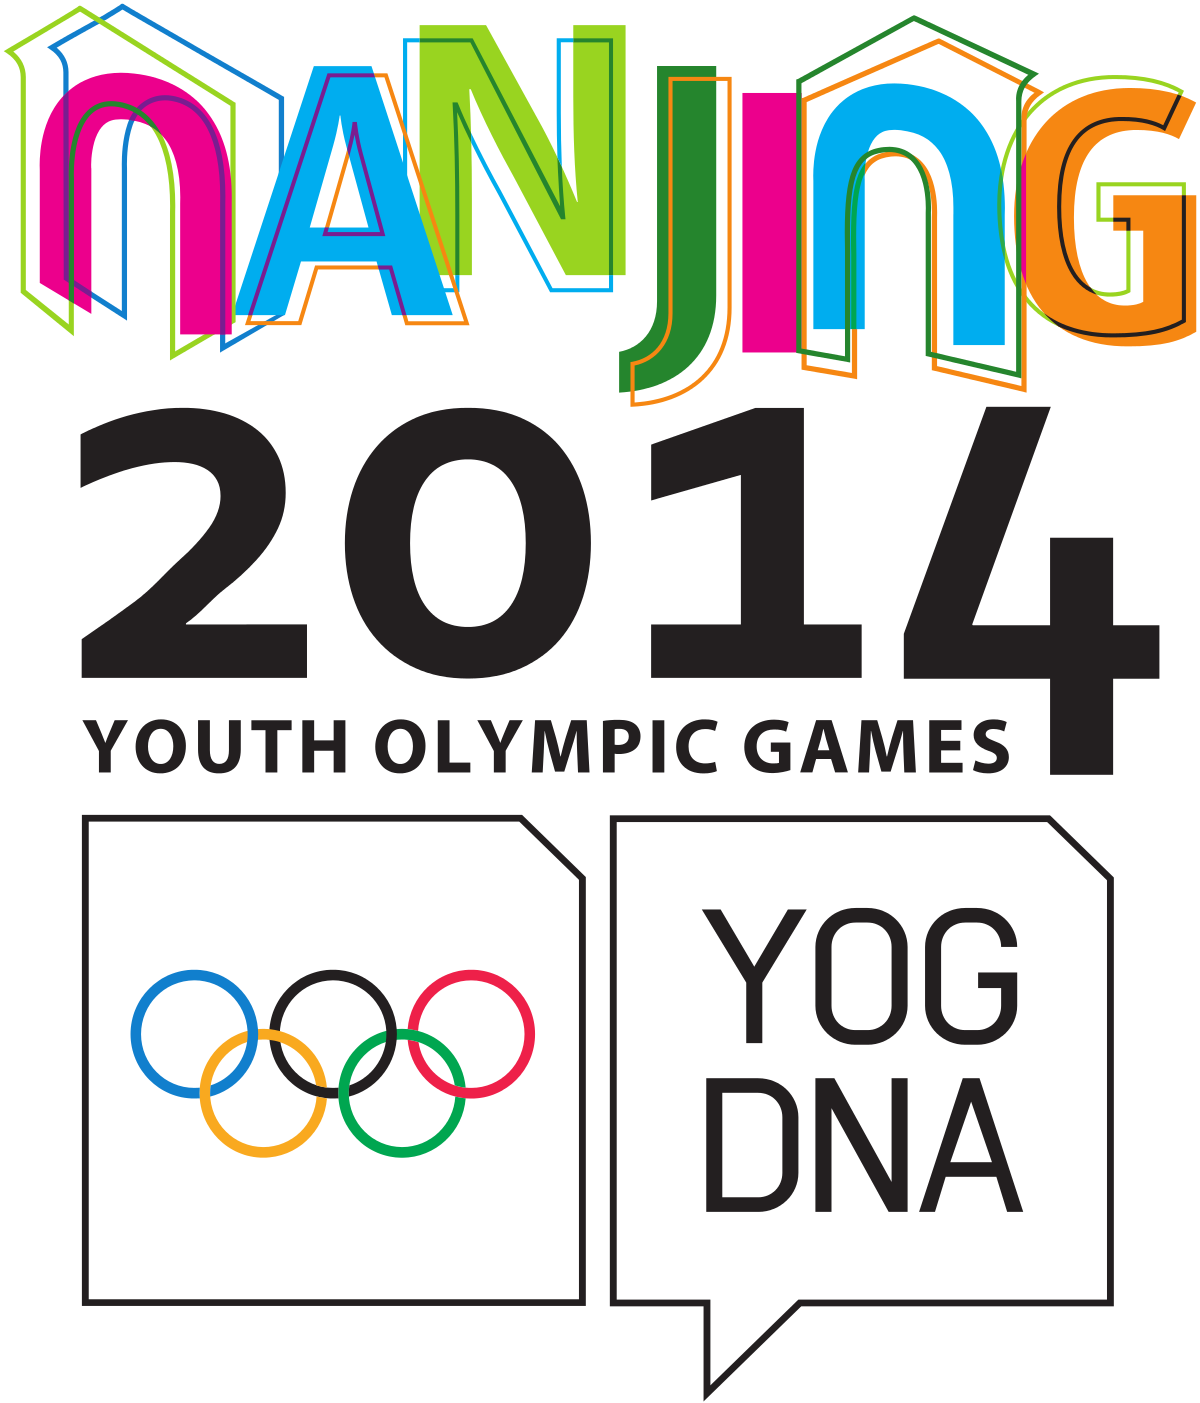 Youth Olympic Games 2014 (1200x1403)